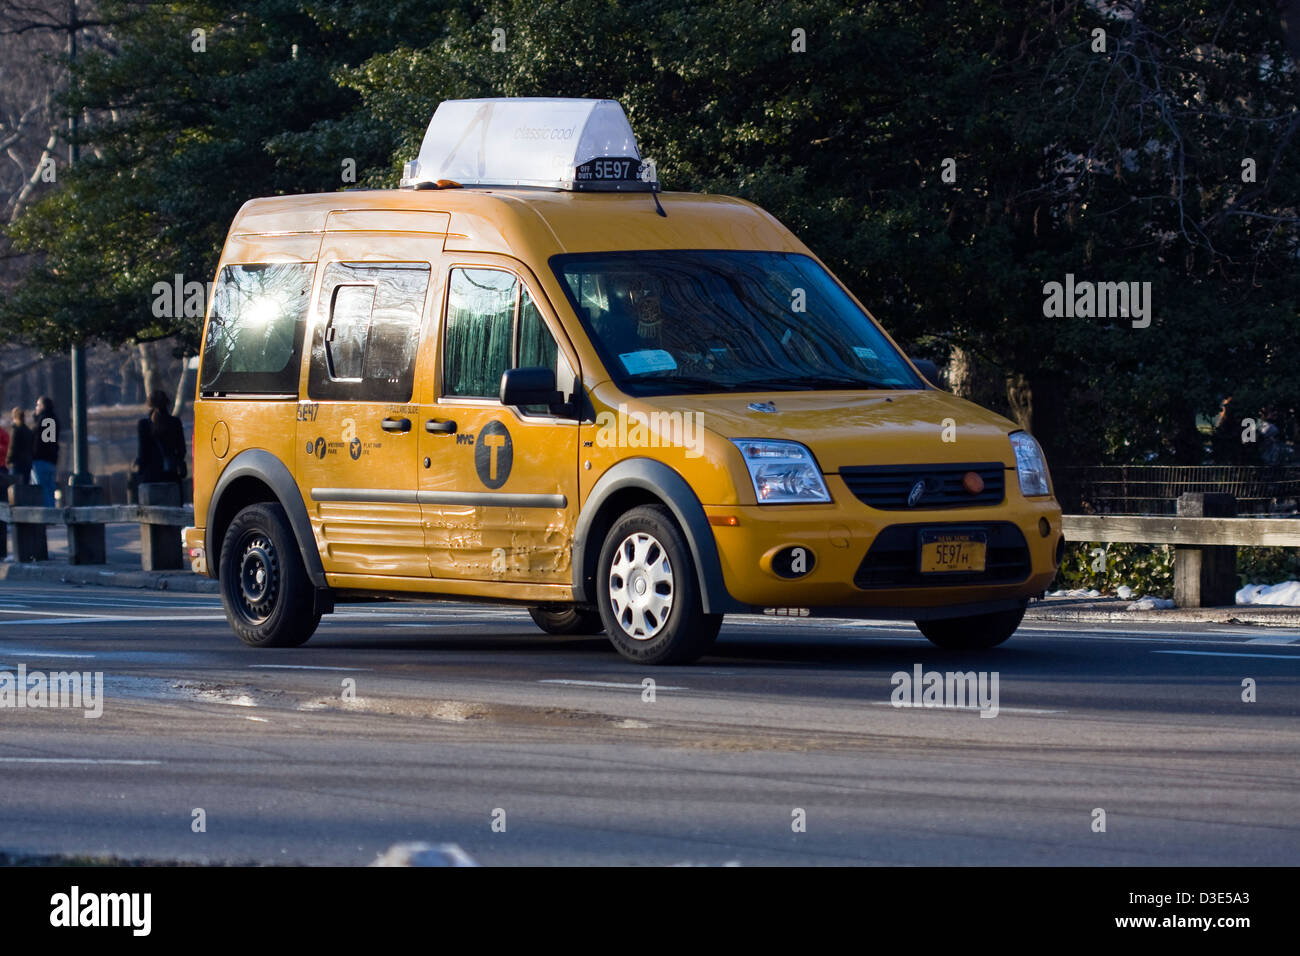 Ford Transit Connext Compact Panel Van developed by Ford Europe used as a NYC Taxi Cab in Central Park in New York City Stock Photo